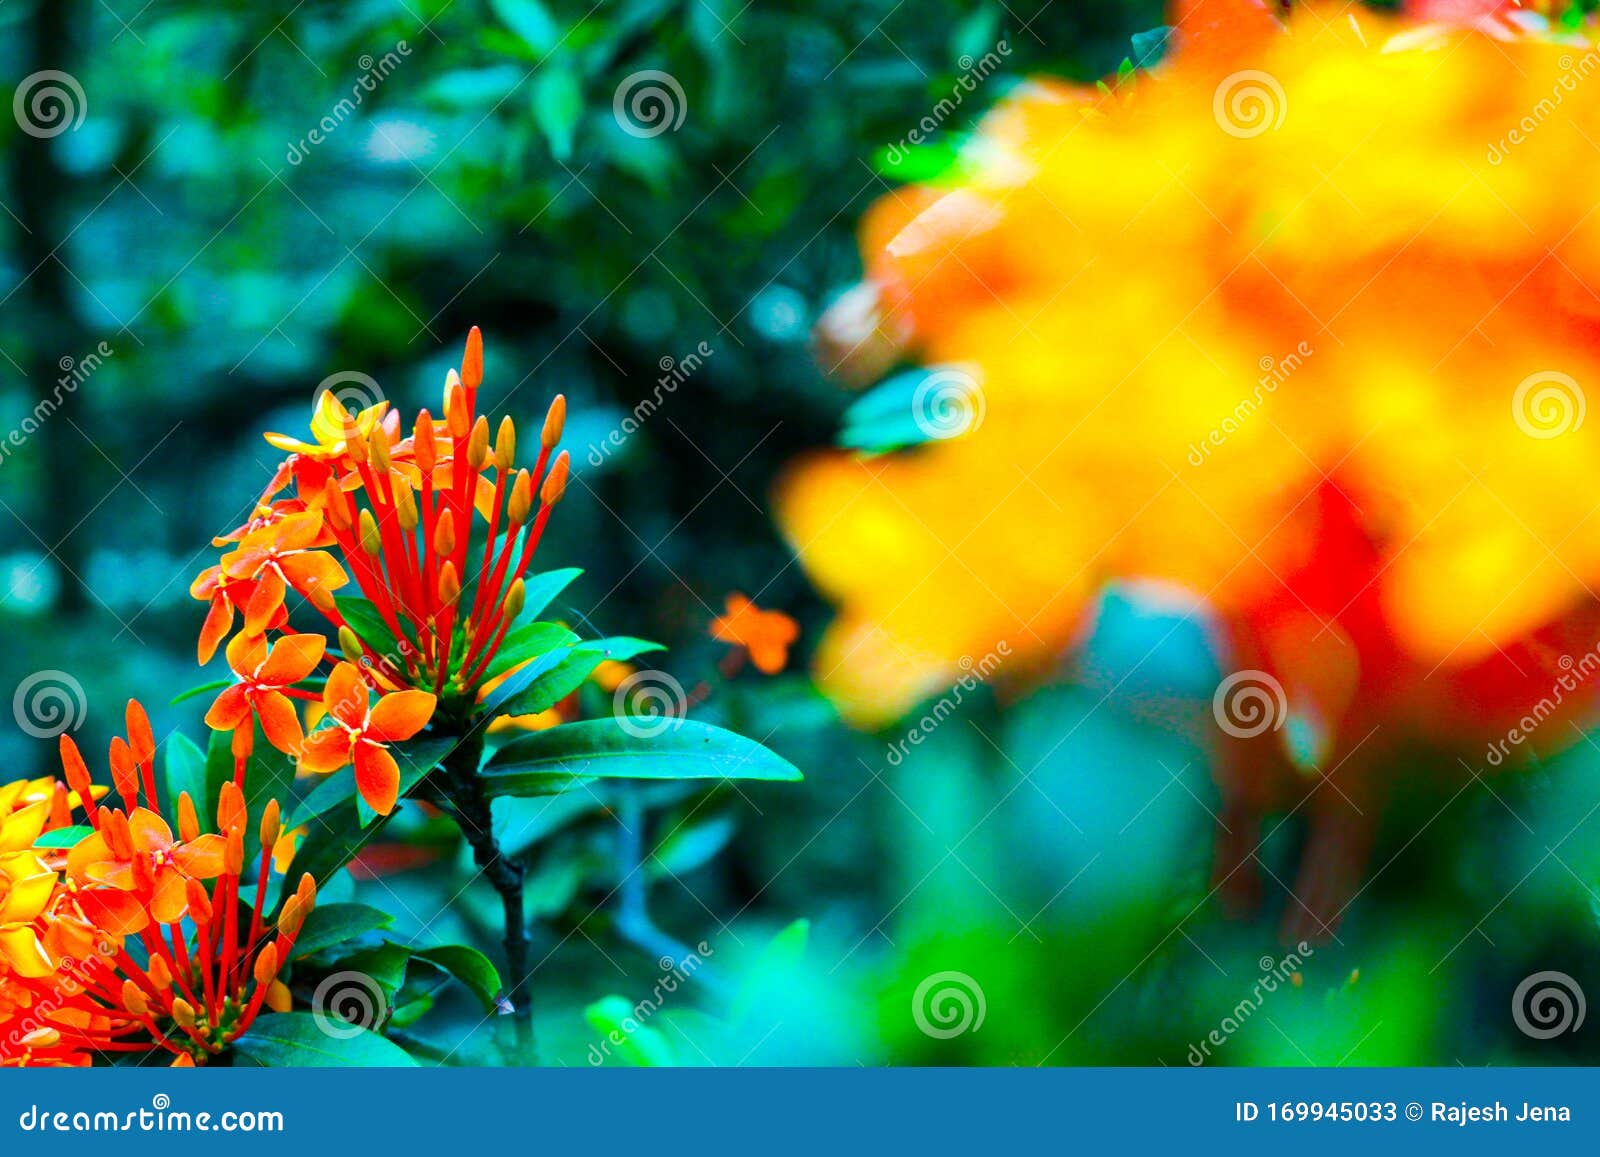 Nature flowers background Royalty Free Vector Image